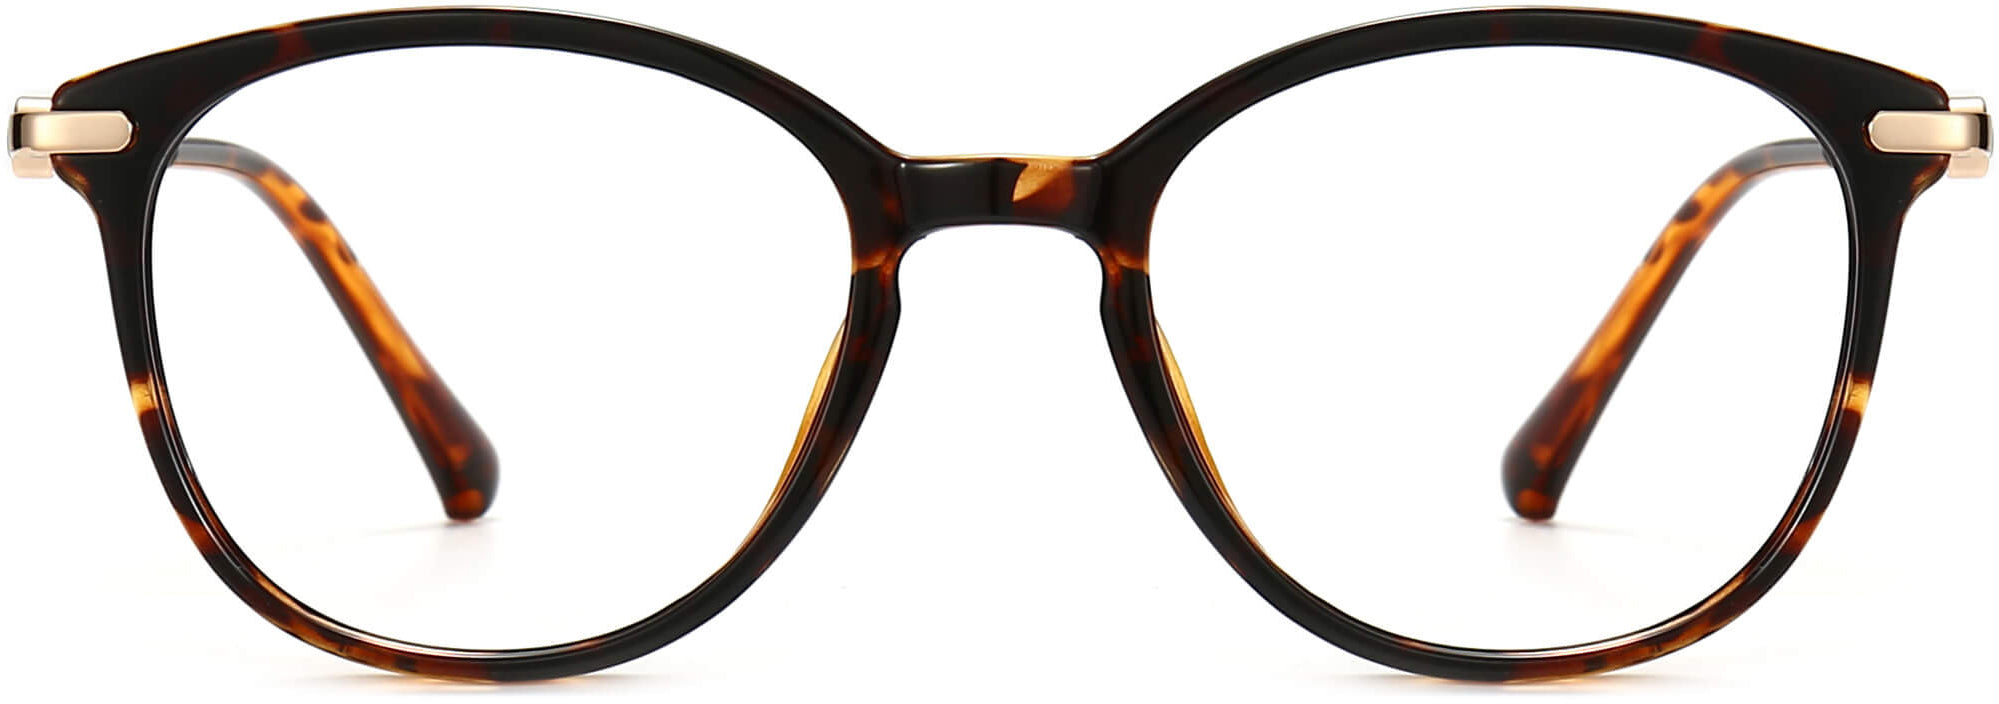 Allyson Round Tortoise Eyeglasses from ANRRI, front view